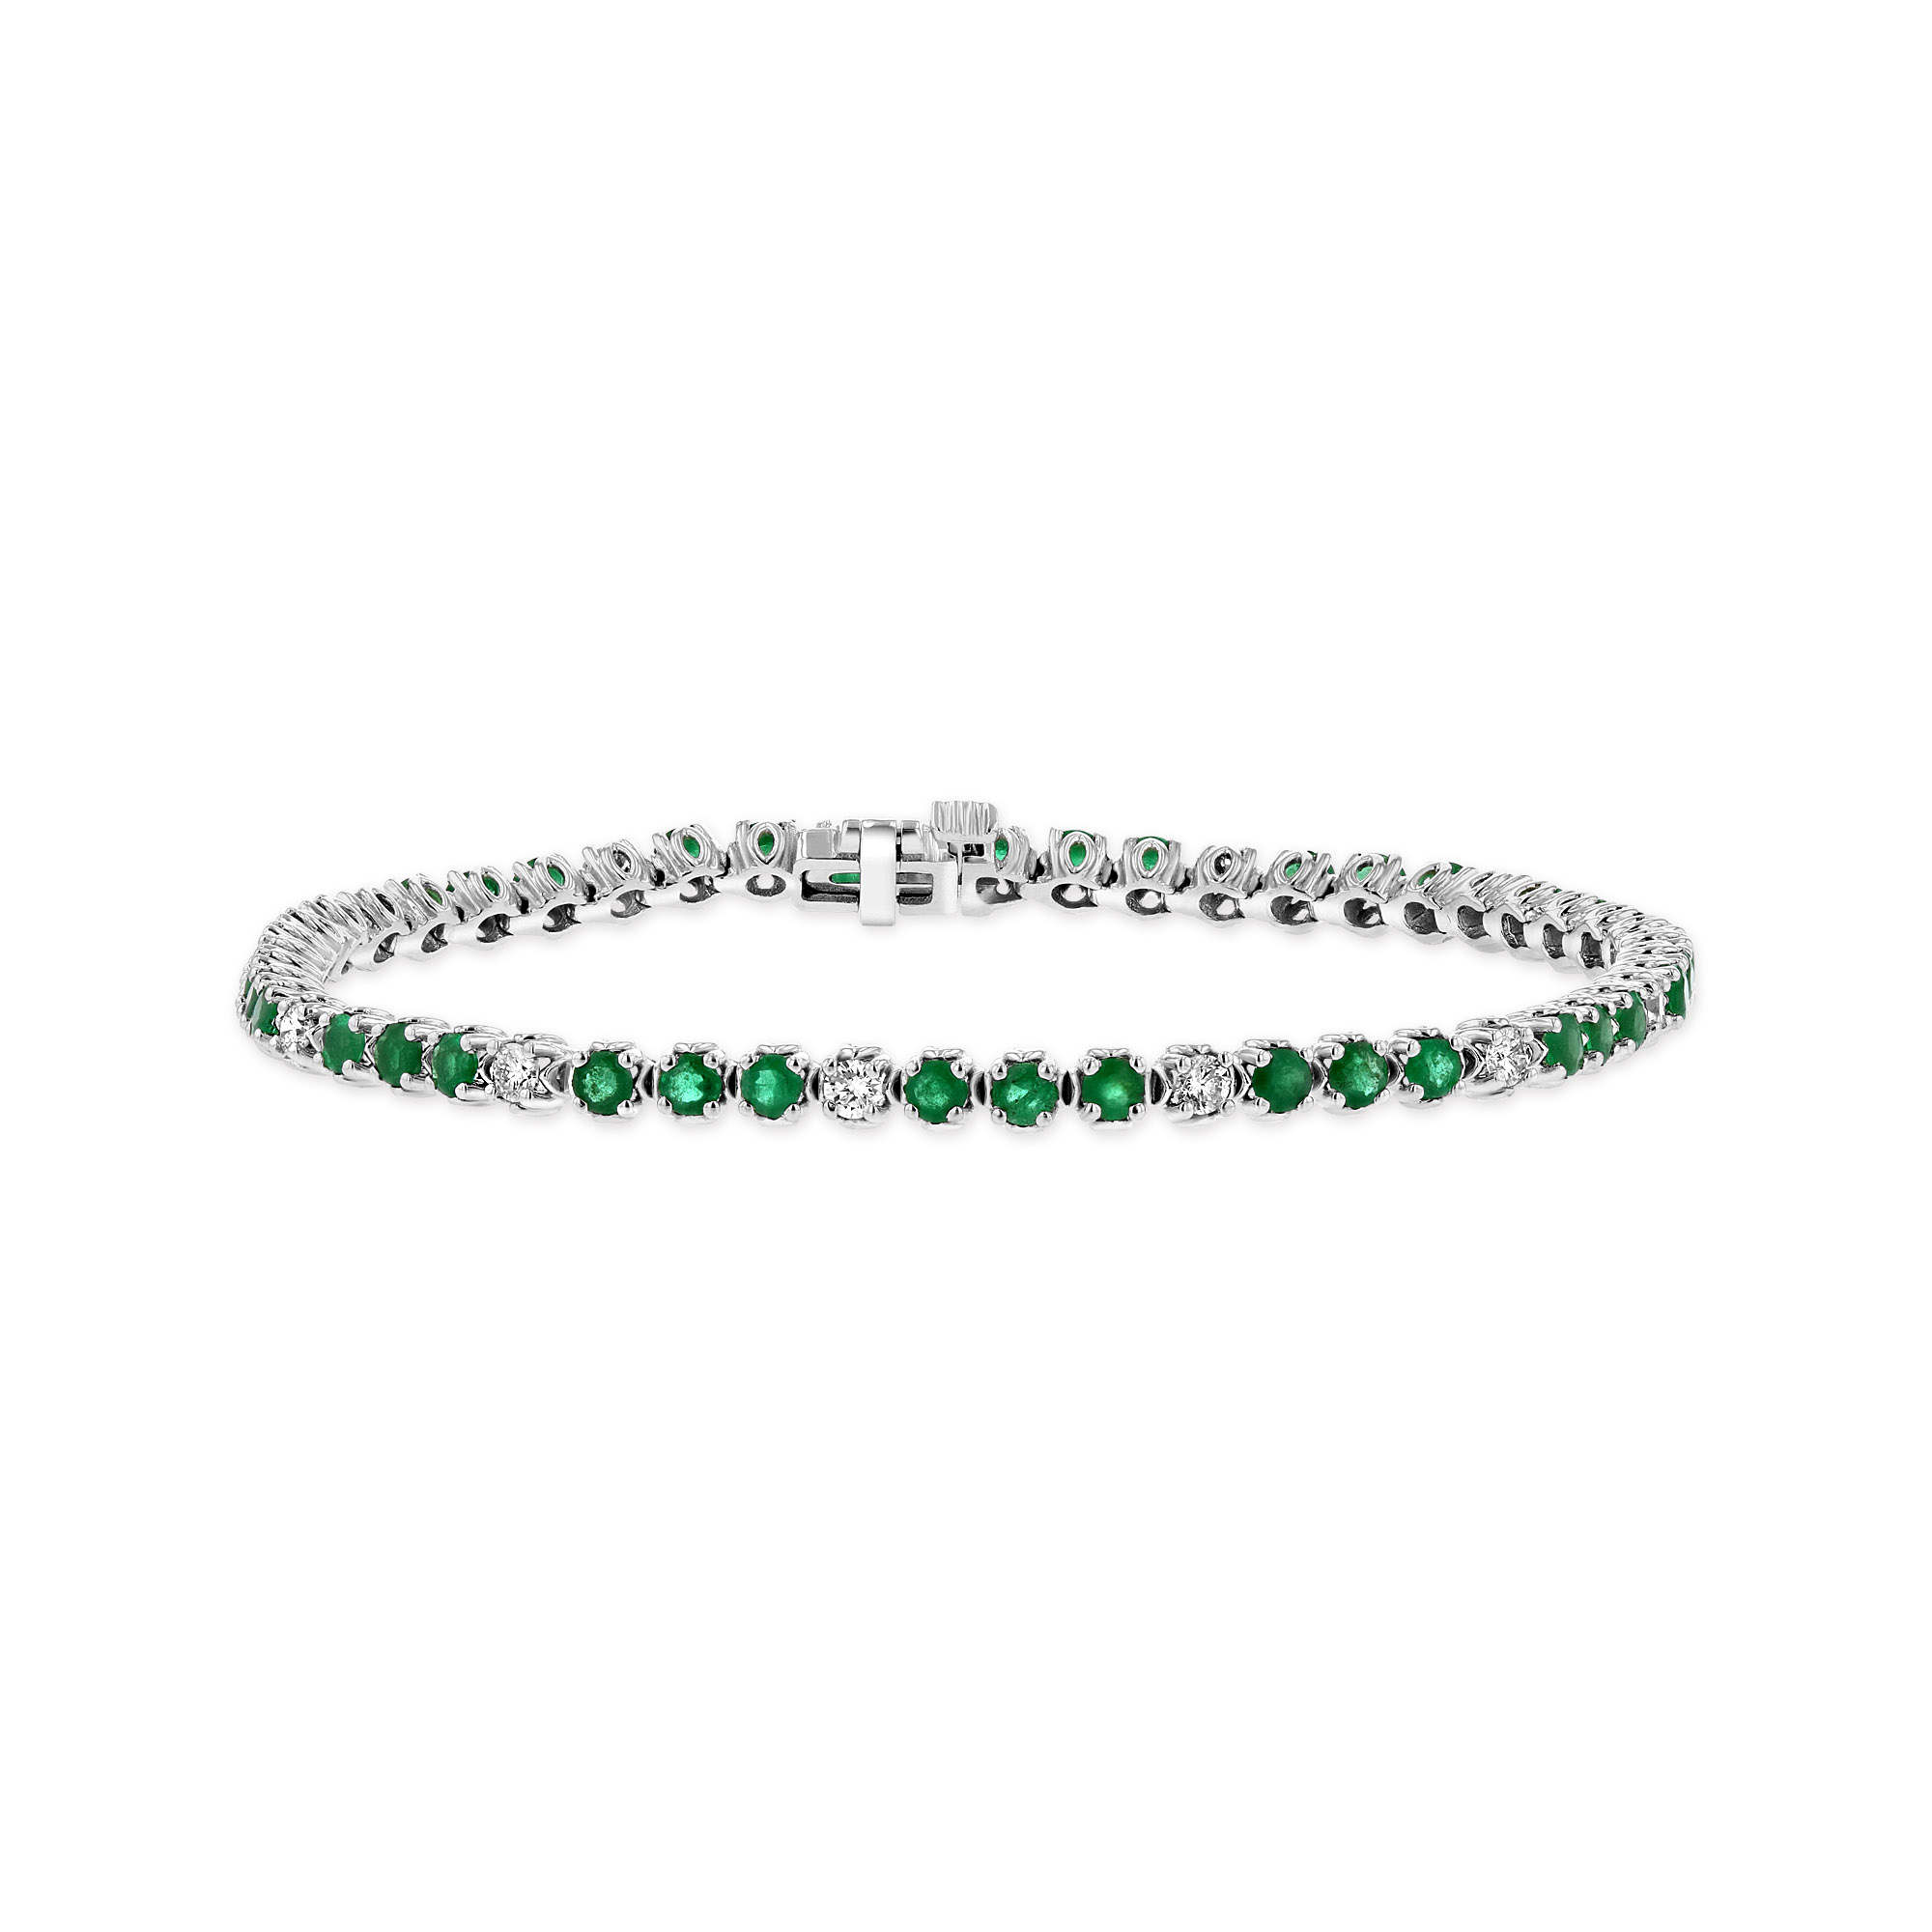 View 3.09ctw Diamond and Emerald Bracelet in 14k White Gold